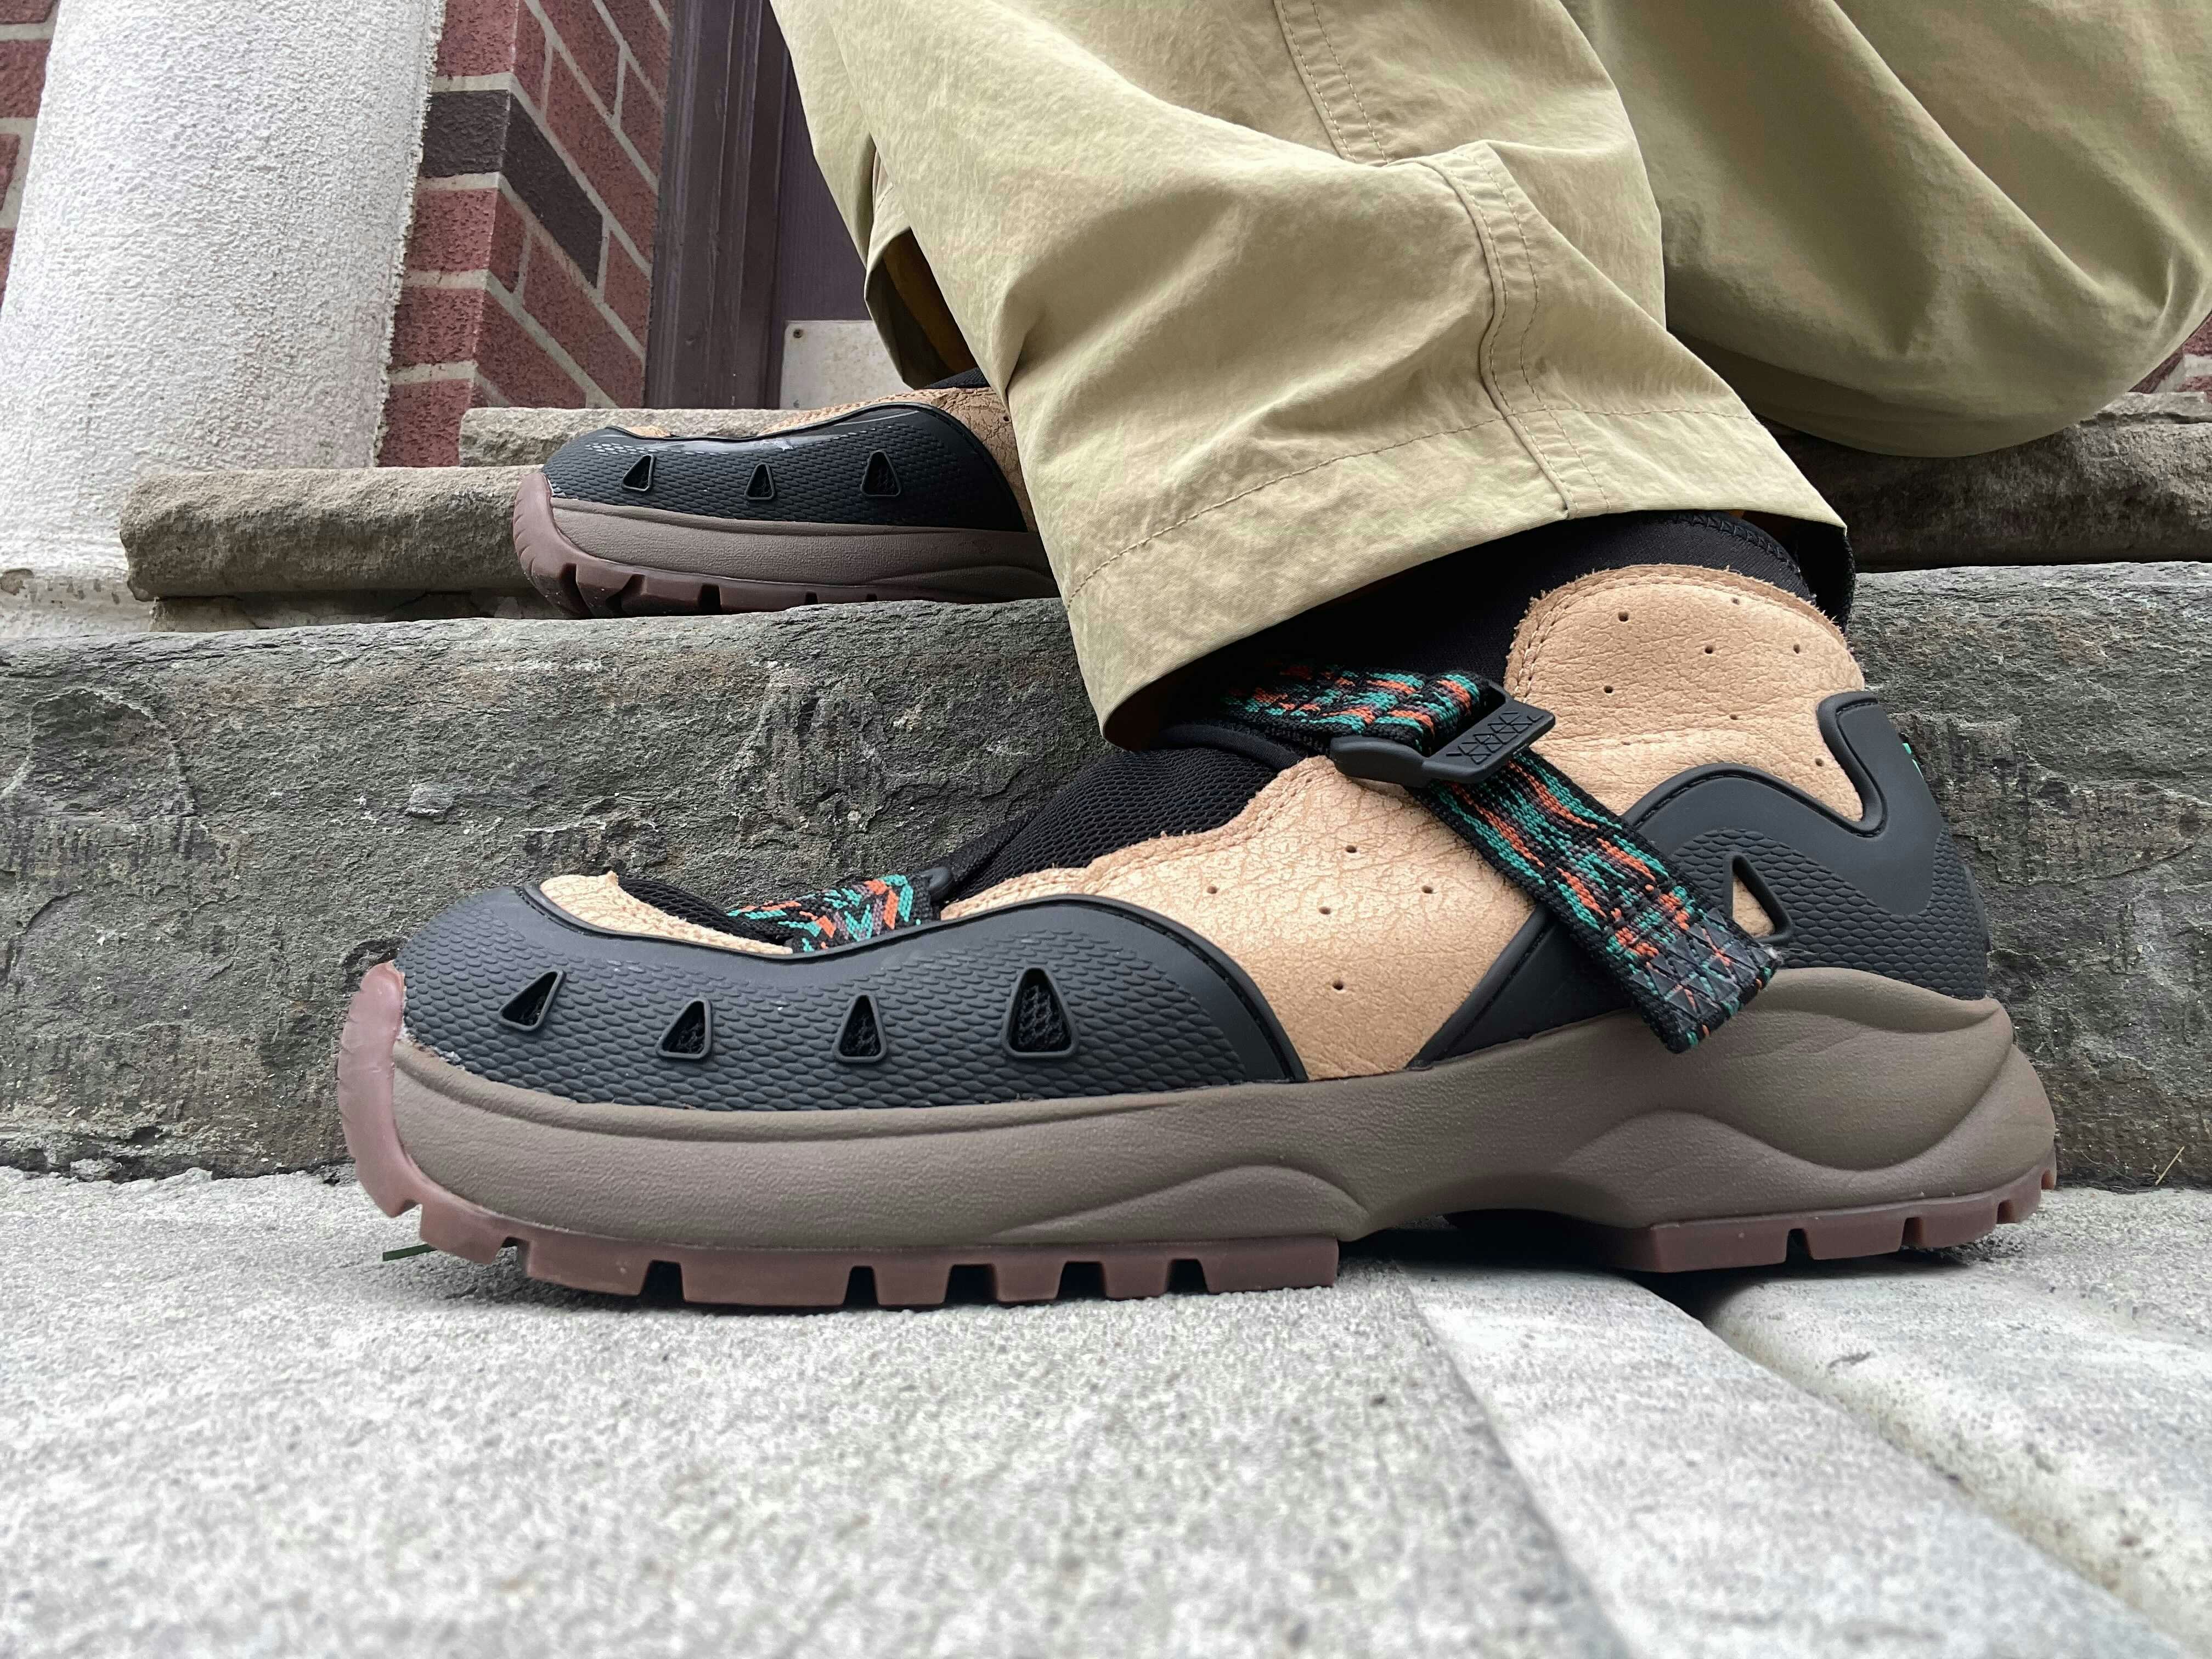 Wearing Teva's Revive '94 Mid: An amazing boot-meets